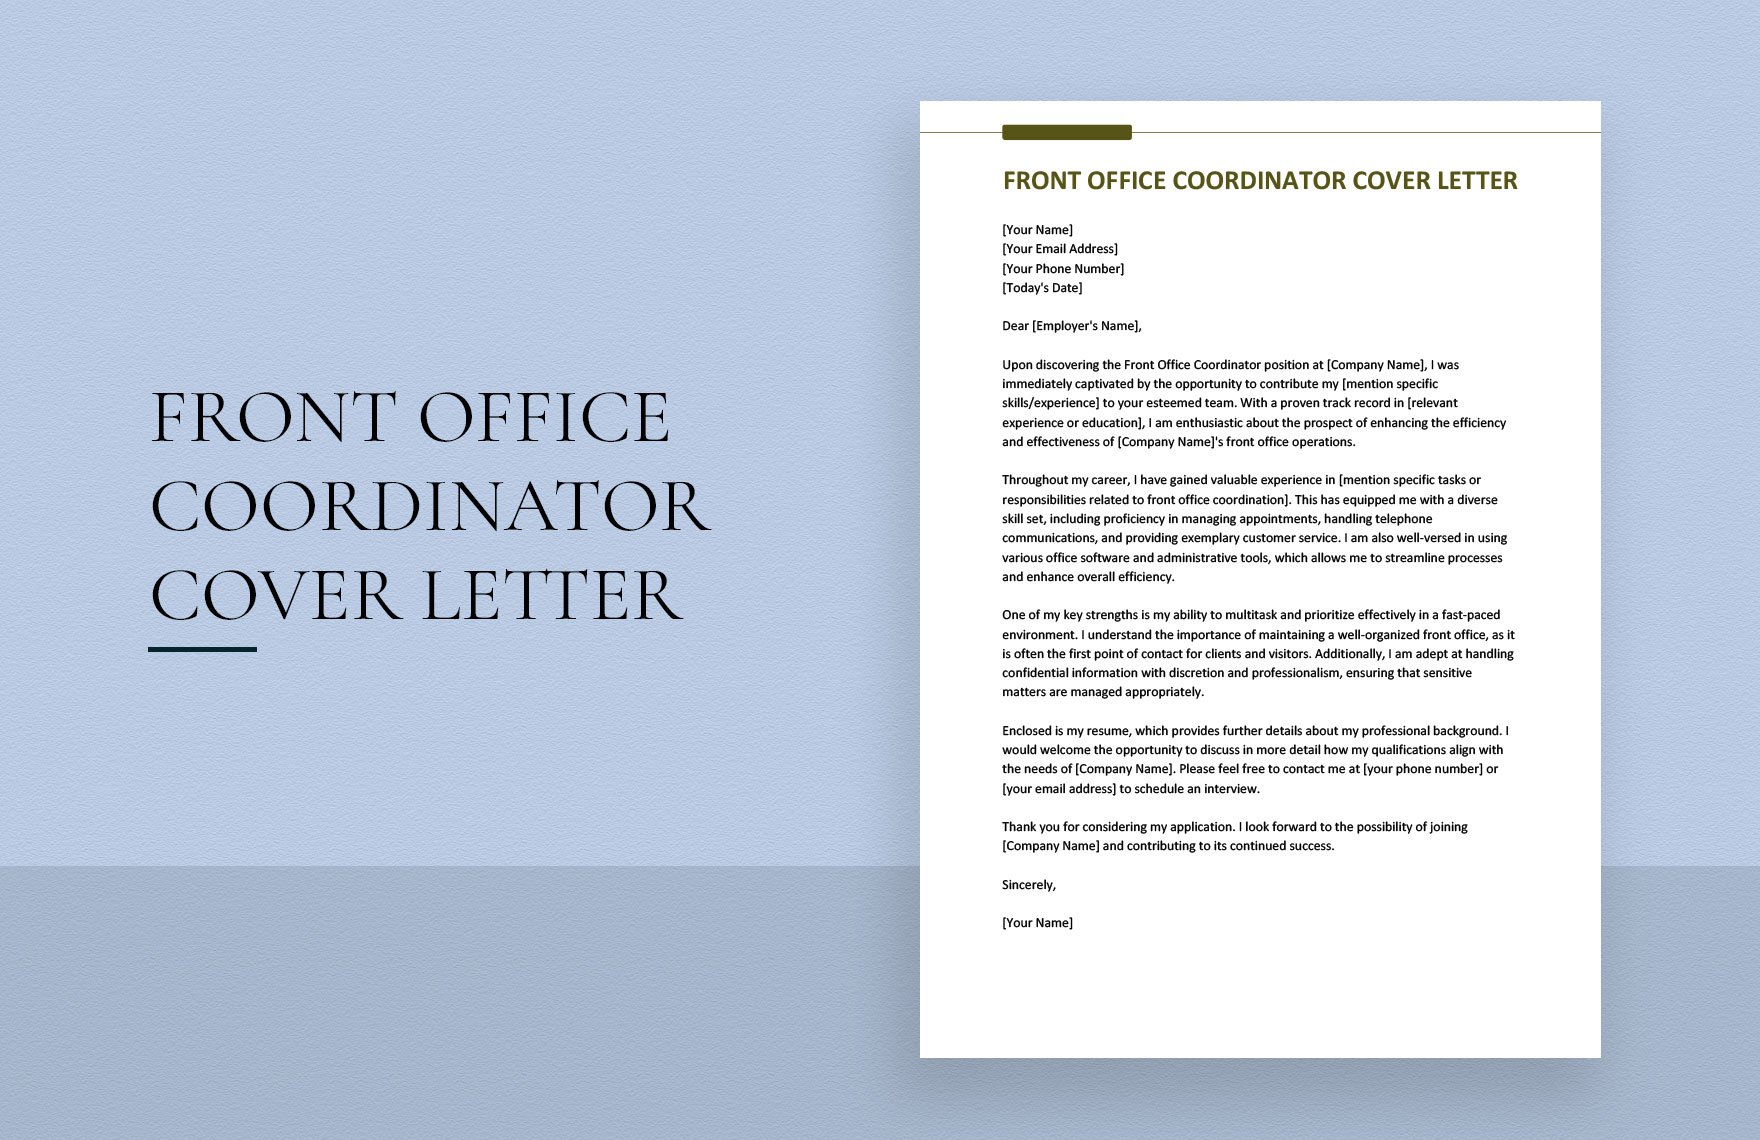 Front Office Coordinator Cover Letter